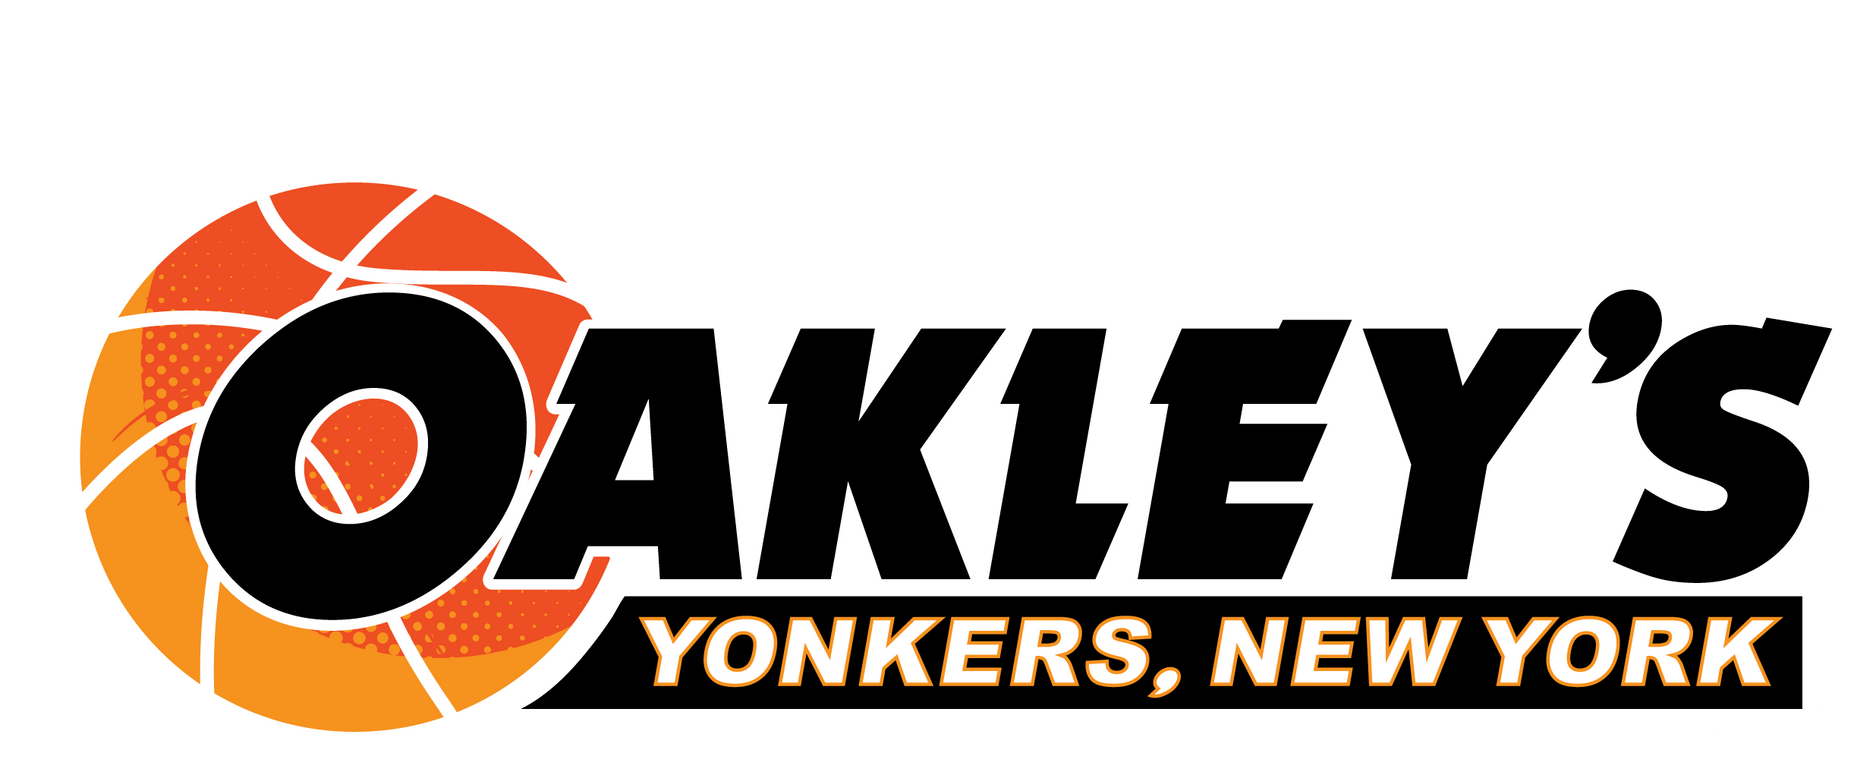 CHARLES OAKLEY CAR WASH WITH CHARLES OAKLEY SIGNATURE IN YONKERS NEW YORK